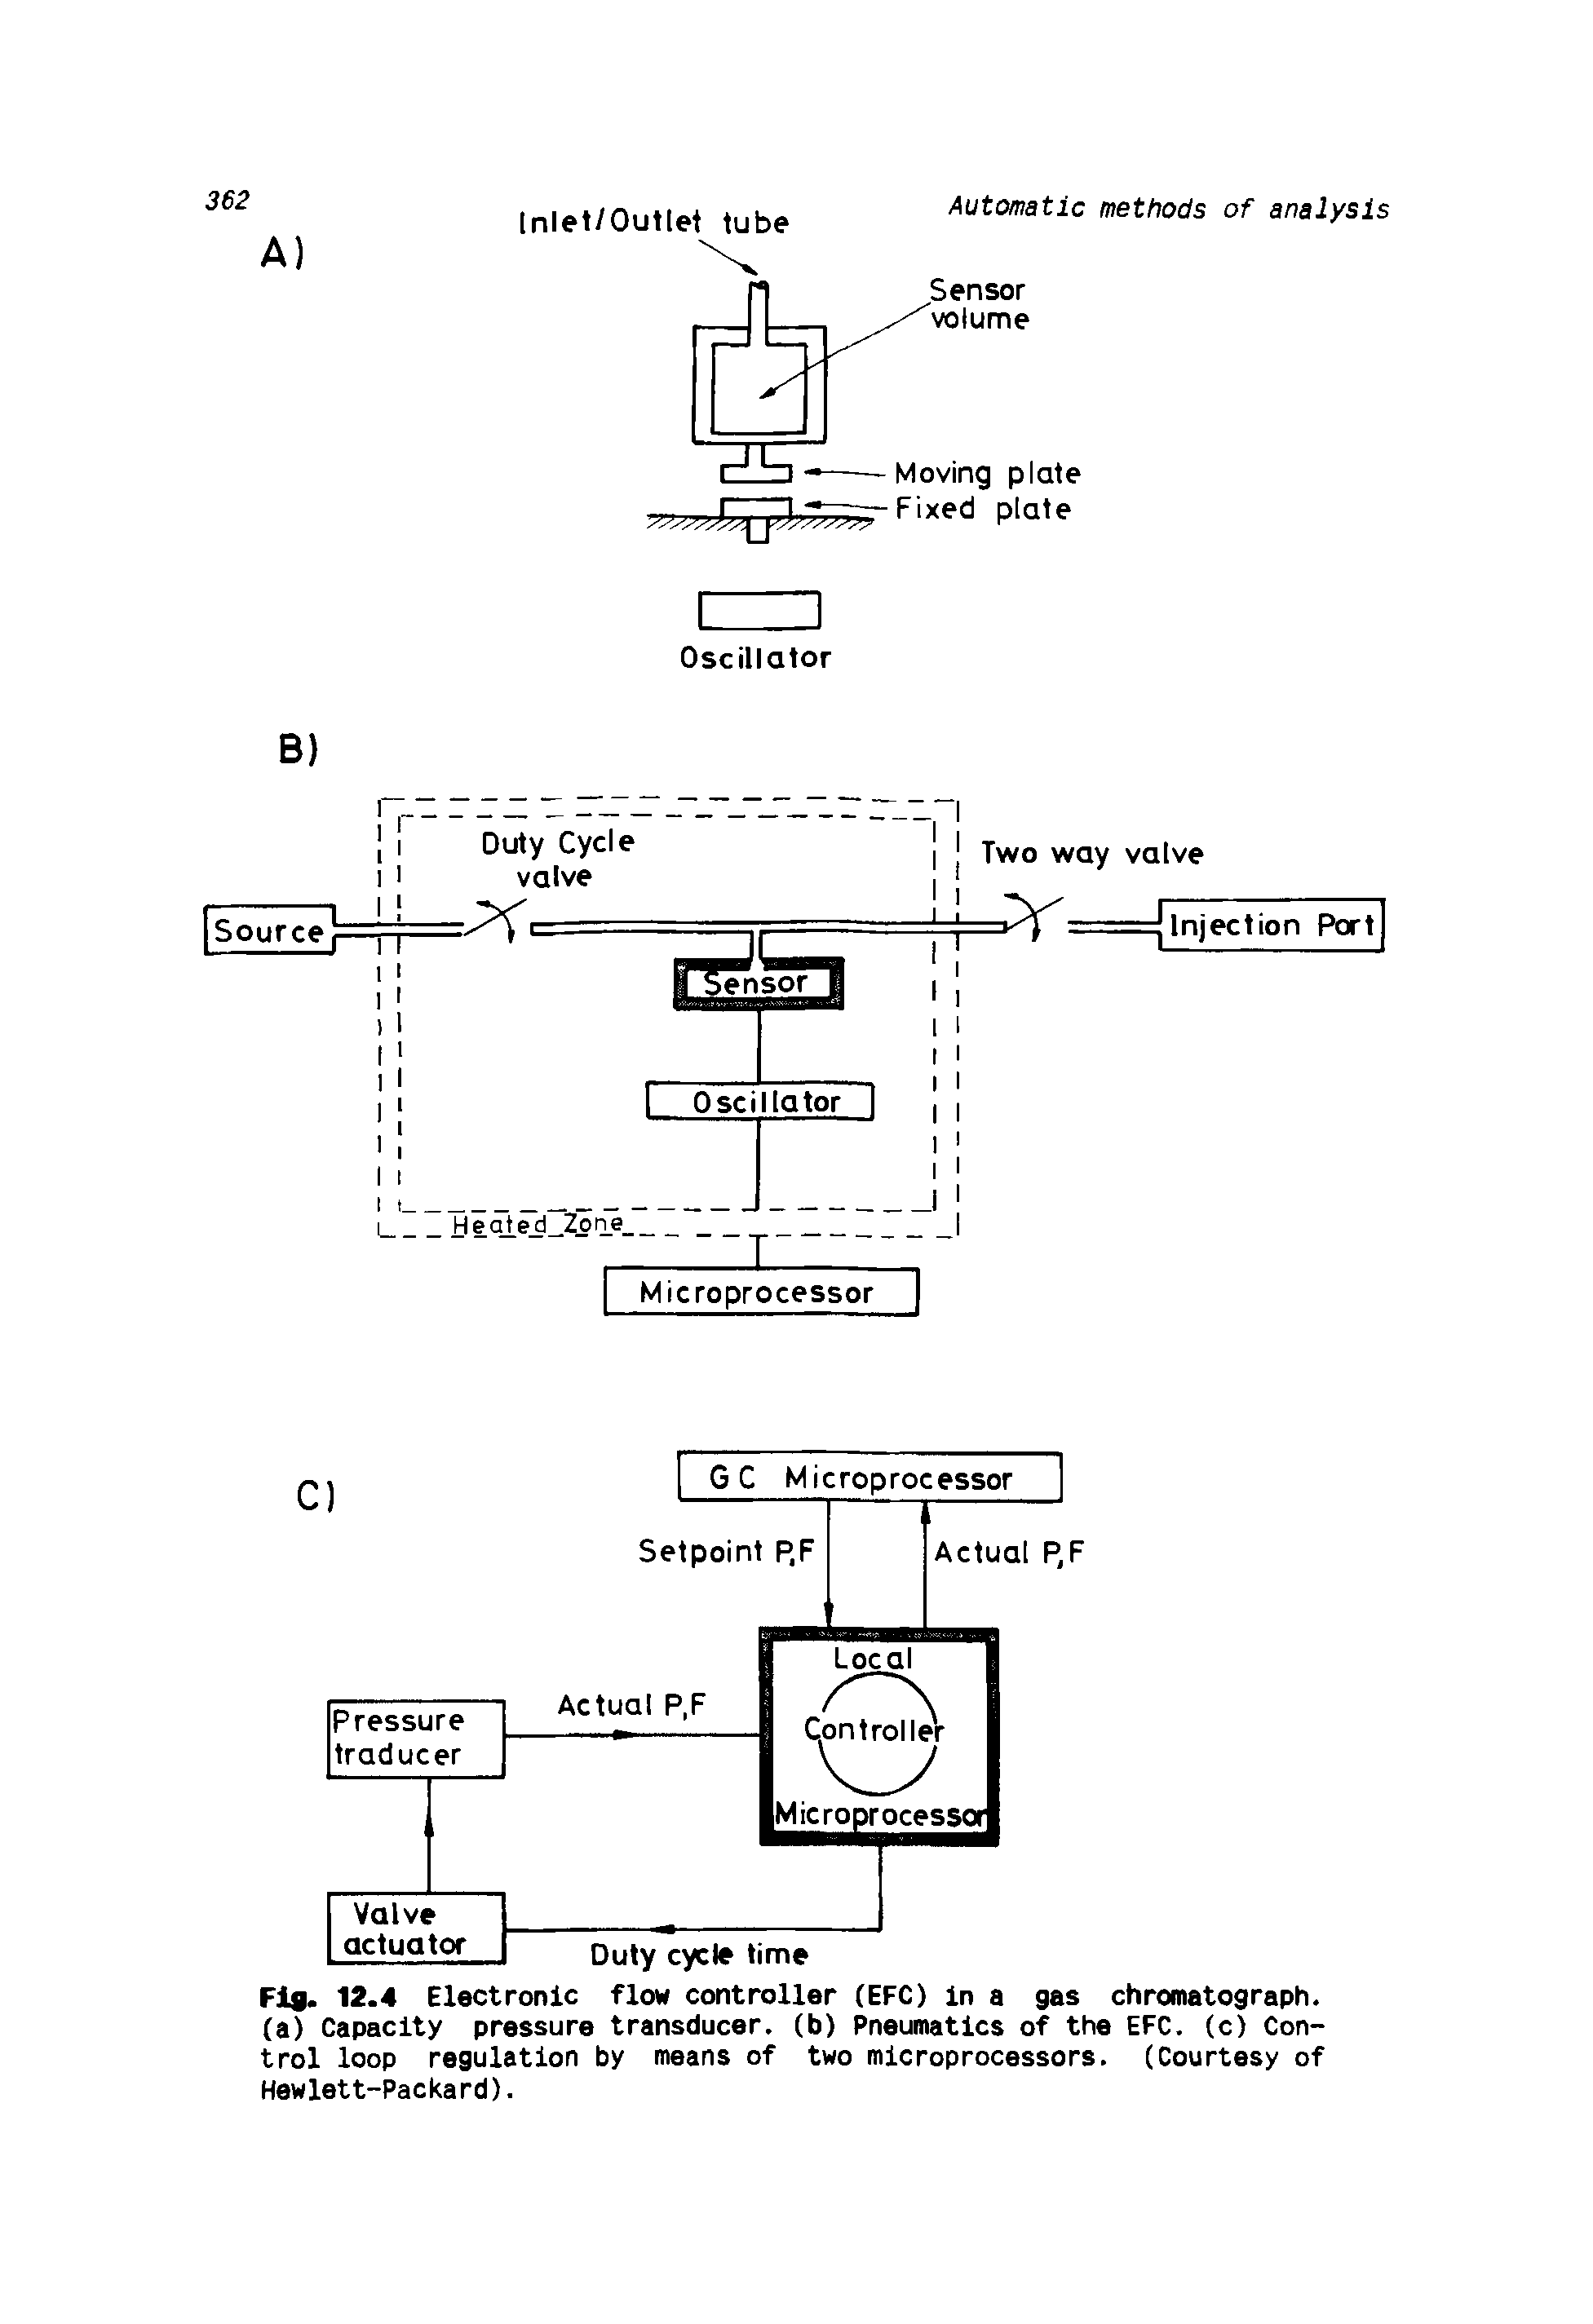 Fig. 12.4 Electronic flow controller (EFC) in a gas chromatograph, (a) Capacity pressure transducer, (b) Pneumatics of the EFC. (c) Control loop regulation by means of two microprocessors. (Courtesy of Hewlett-Packard).